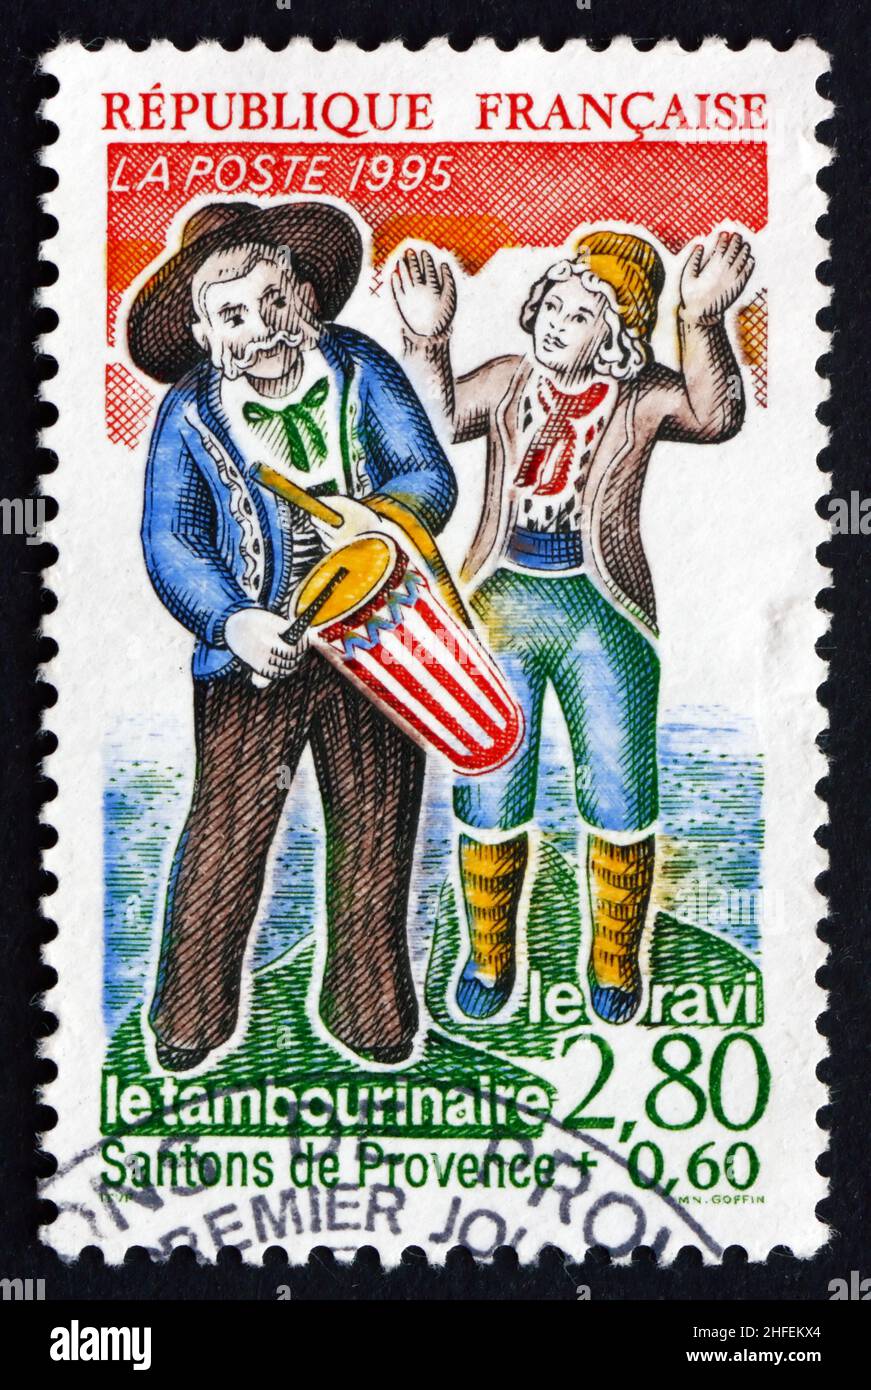 FRANCE - CIRCA 1995: a stamp printed in the France shows The Simpleton and the Tambour Player, Provencal Nativity Figures, circa 1995 Stock Photo